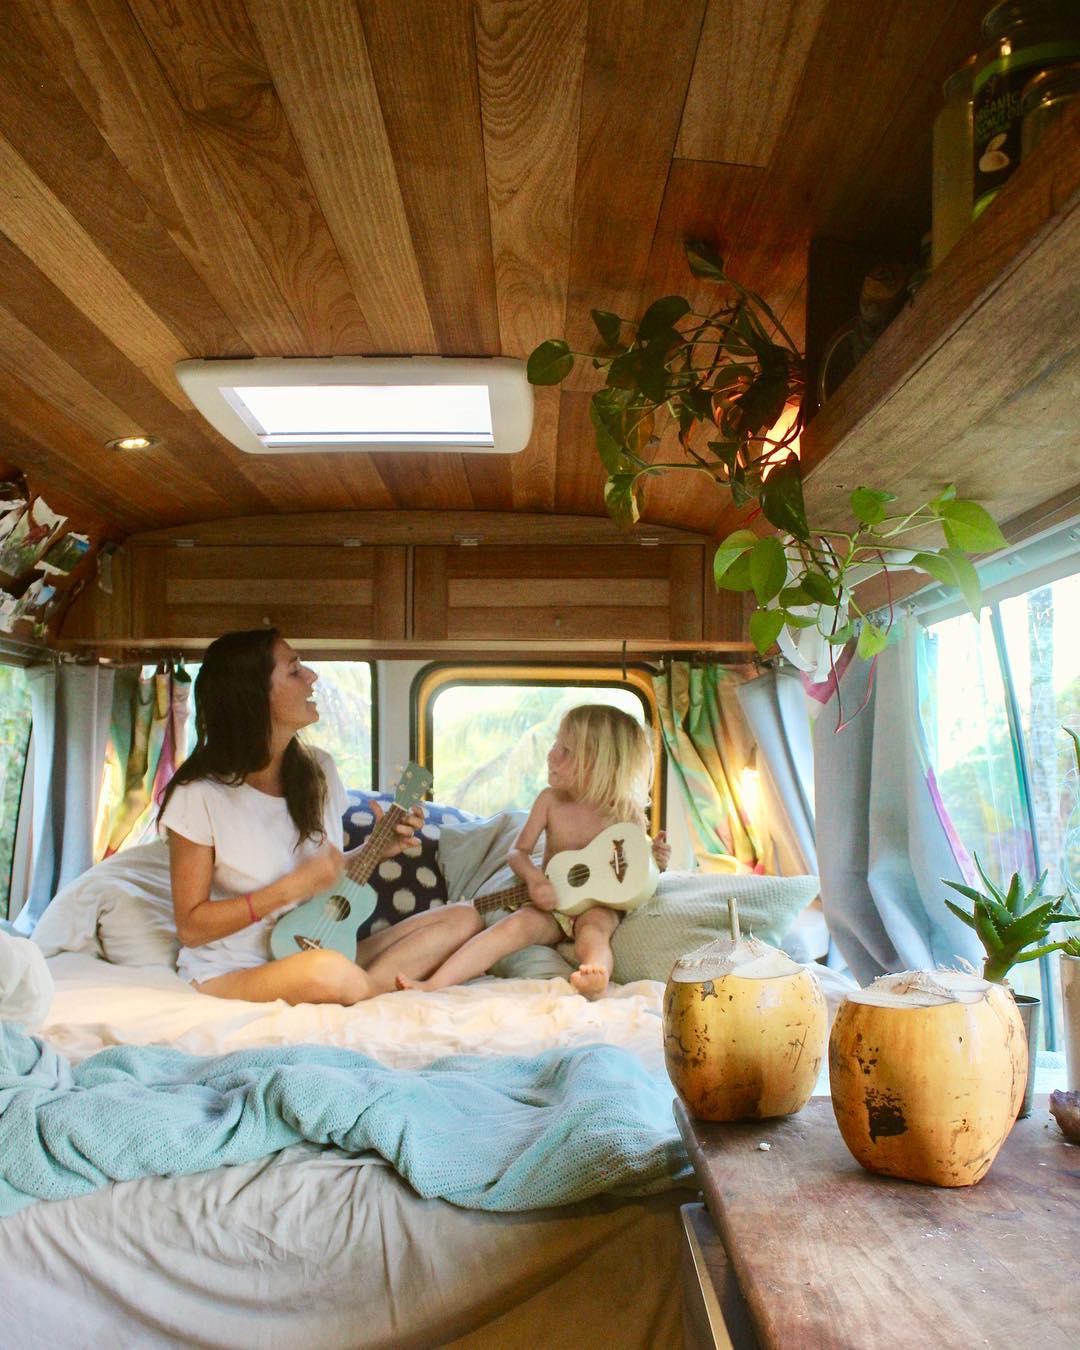 I OWN VAN LIFE! Admitting I live in a van with my kid